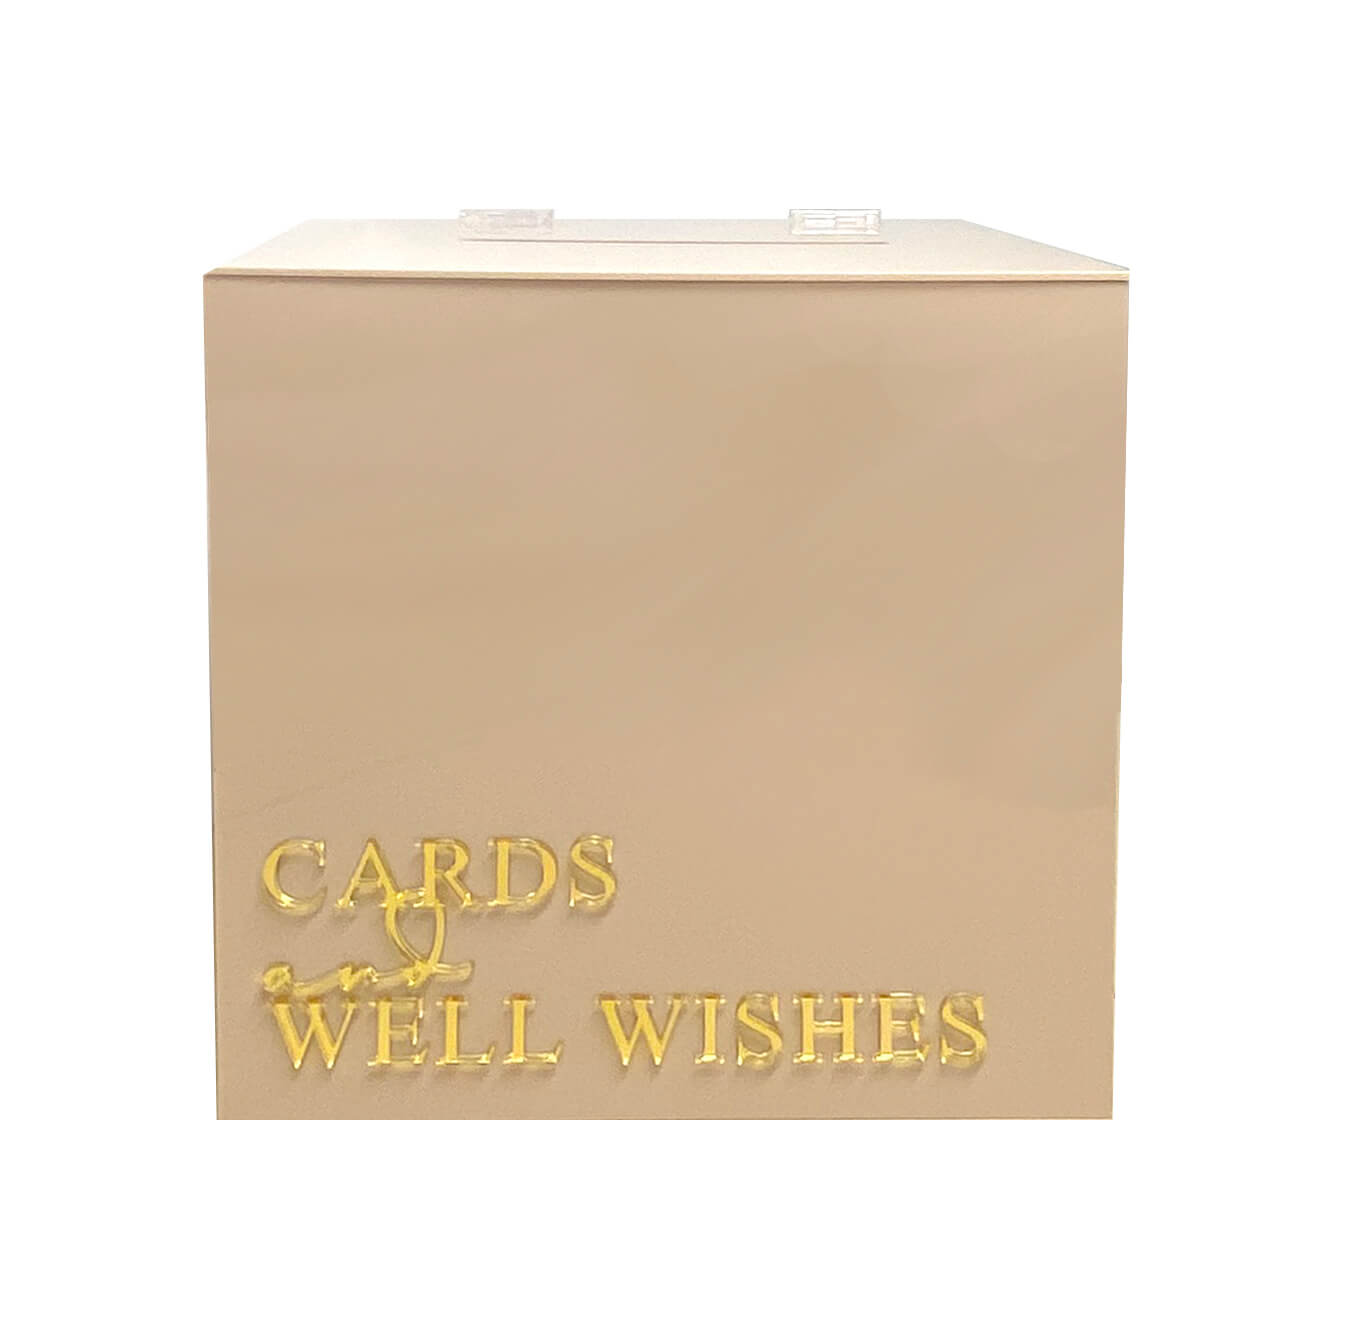 Wishing Well – Latte Acrylic with Gold “Cards & Well Wishes” Text – 30cmW x 30cmD x 30cmH